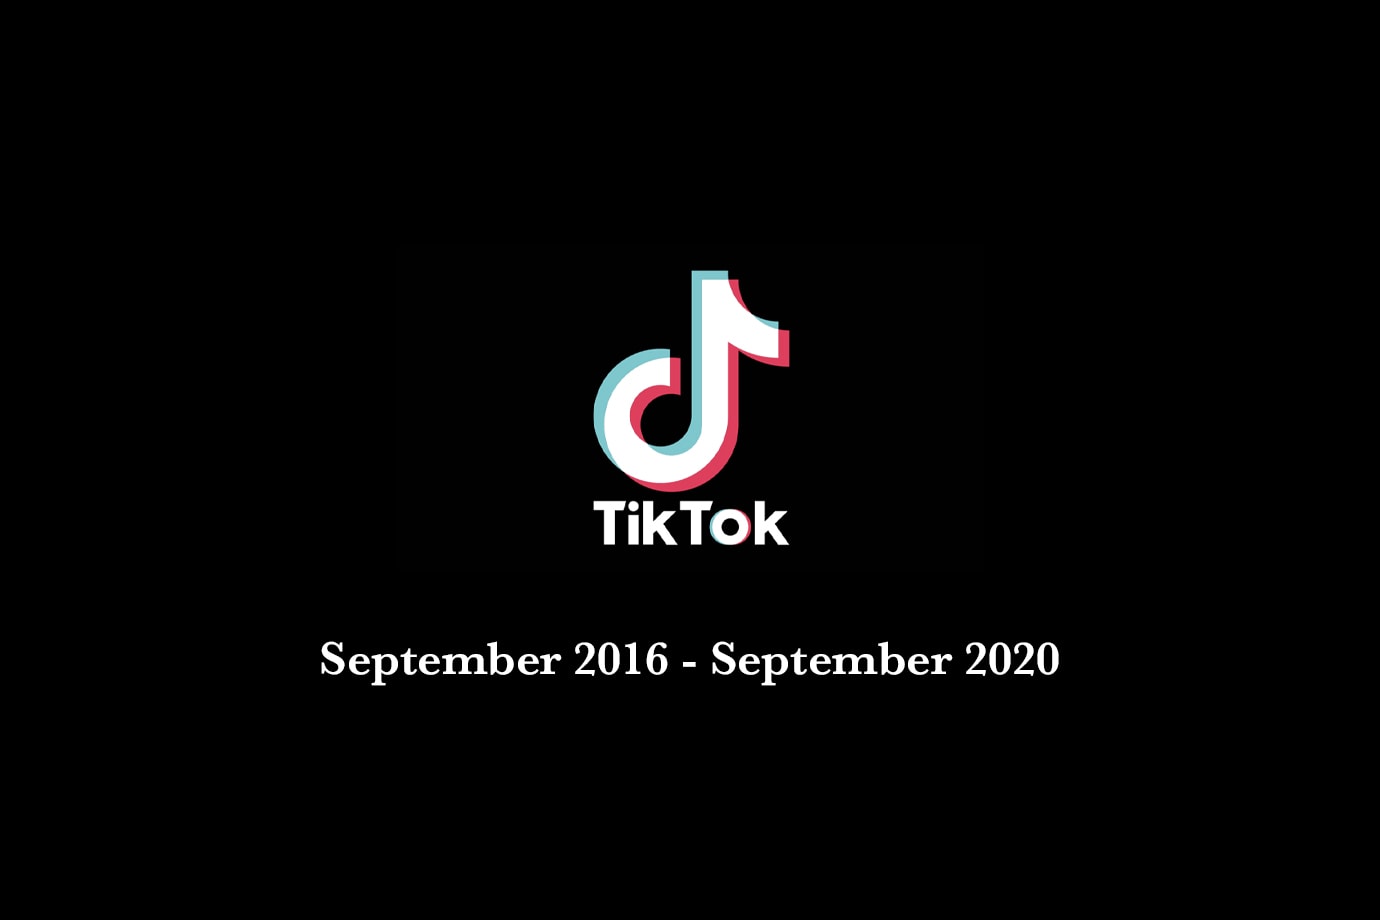 Best TikTok Dance Challenges ByteDance App Banned In the US Donald Trump Rule Law Data Sharing Viral Trends